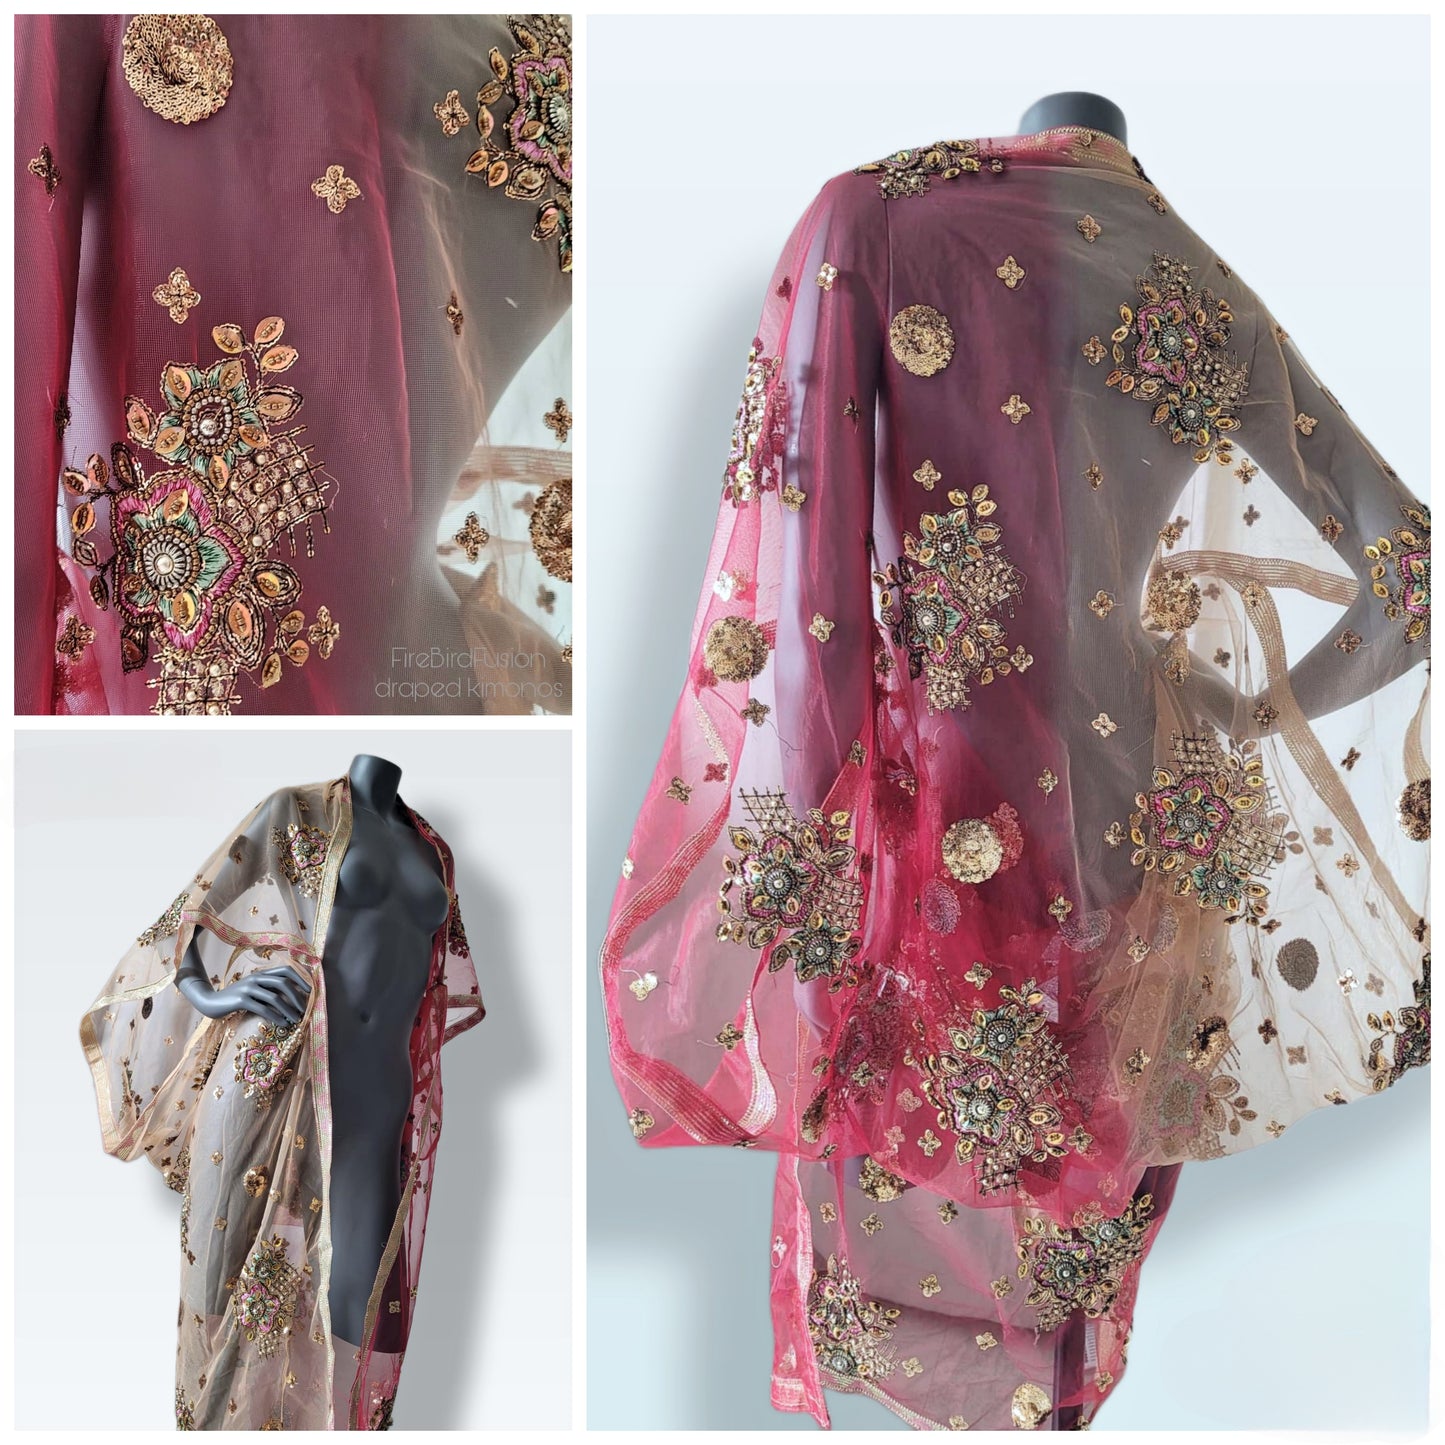 Draped short kimono in warm wine red & ivory with beautiful hand embrodery with glass beads (M-L)